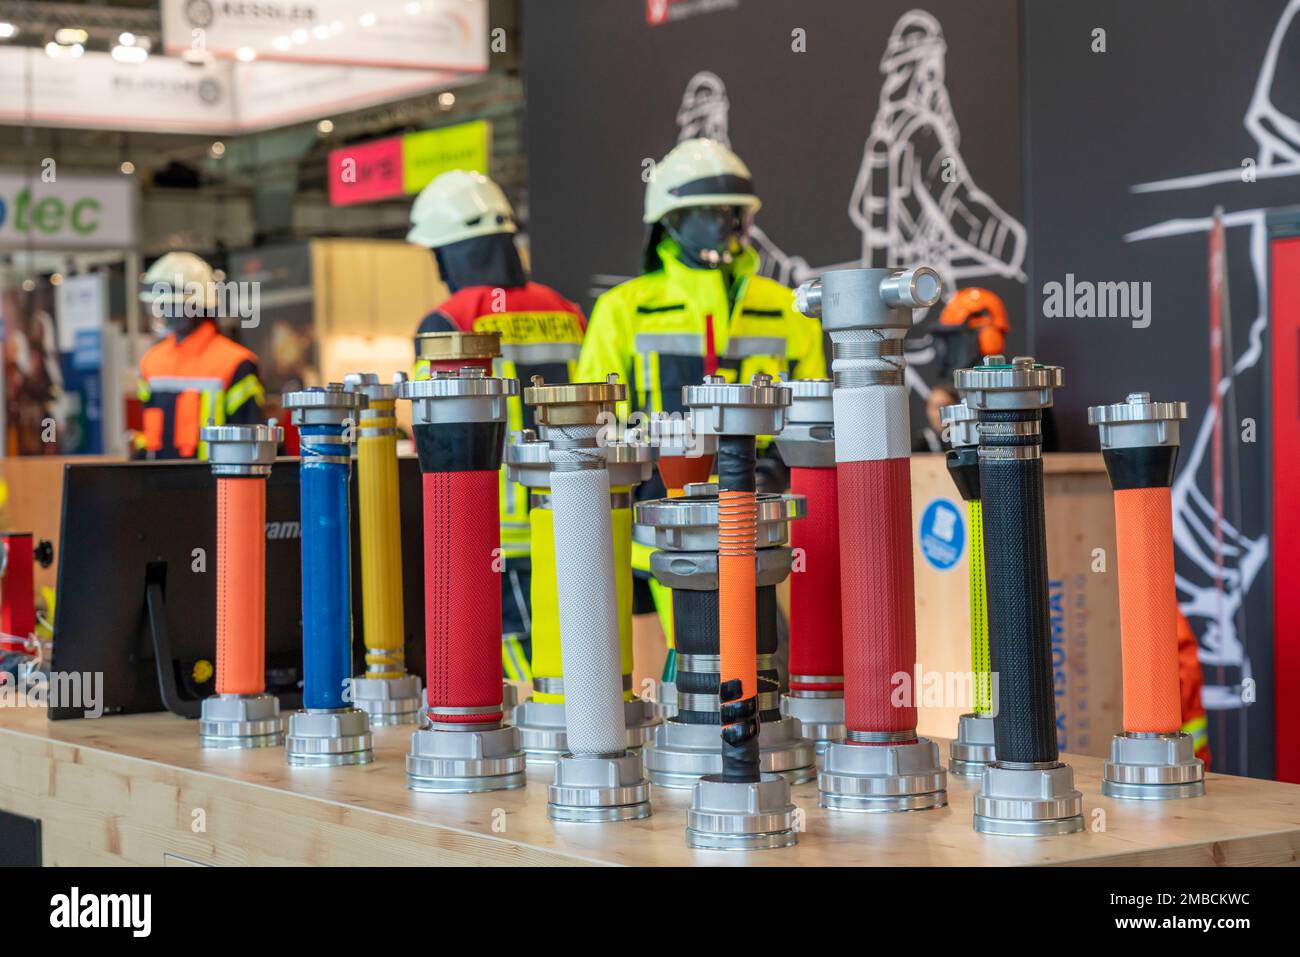 Hose couplings, Interschutz 2022 trade fair in Hanover, the world's largest trade fair for fire brigade, rescue service, disaster control technology, Stock Photo